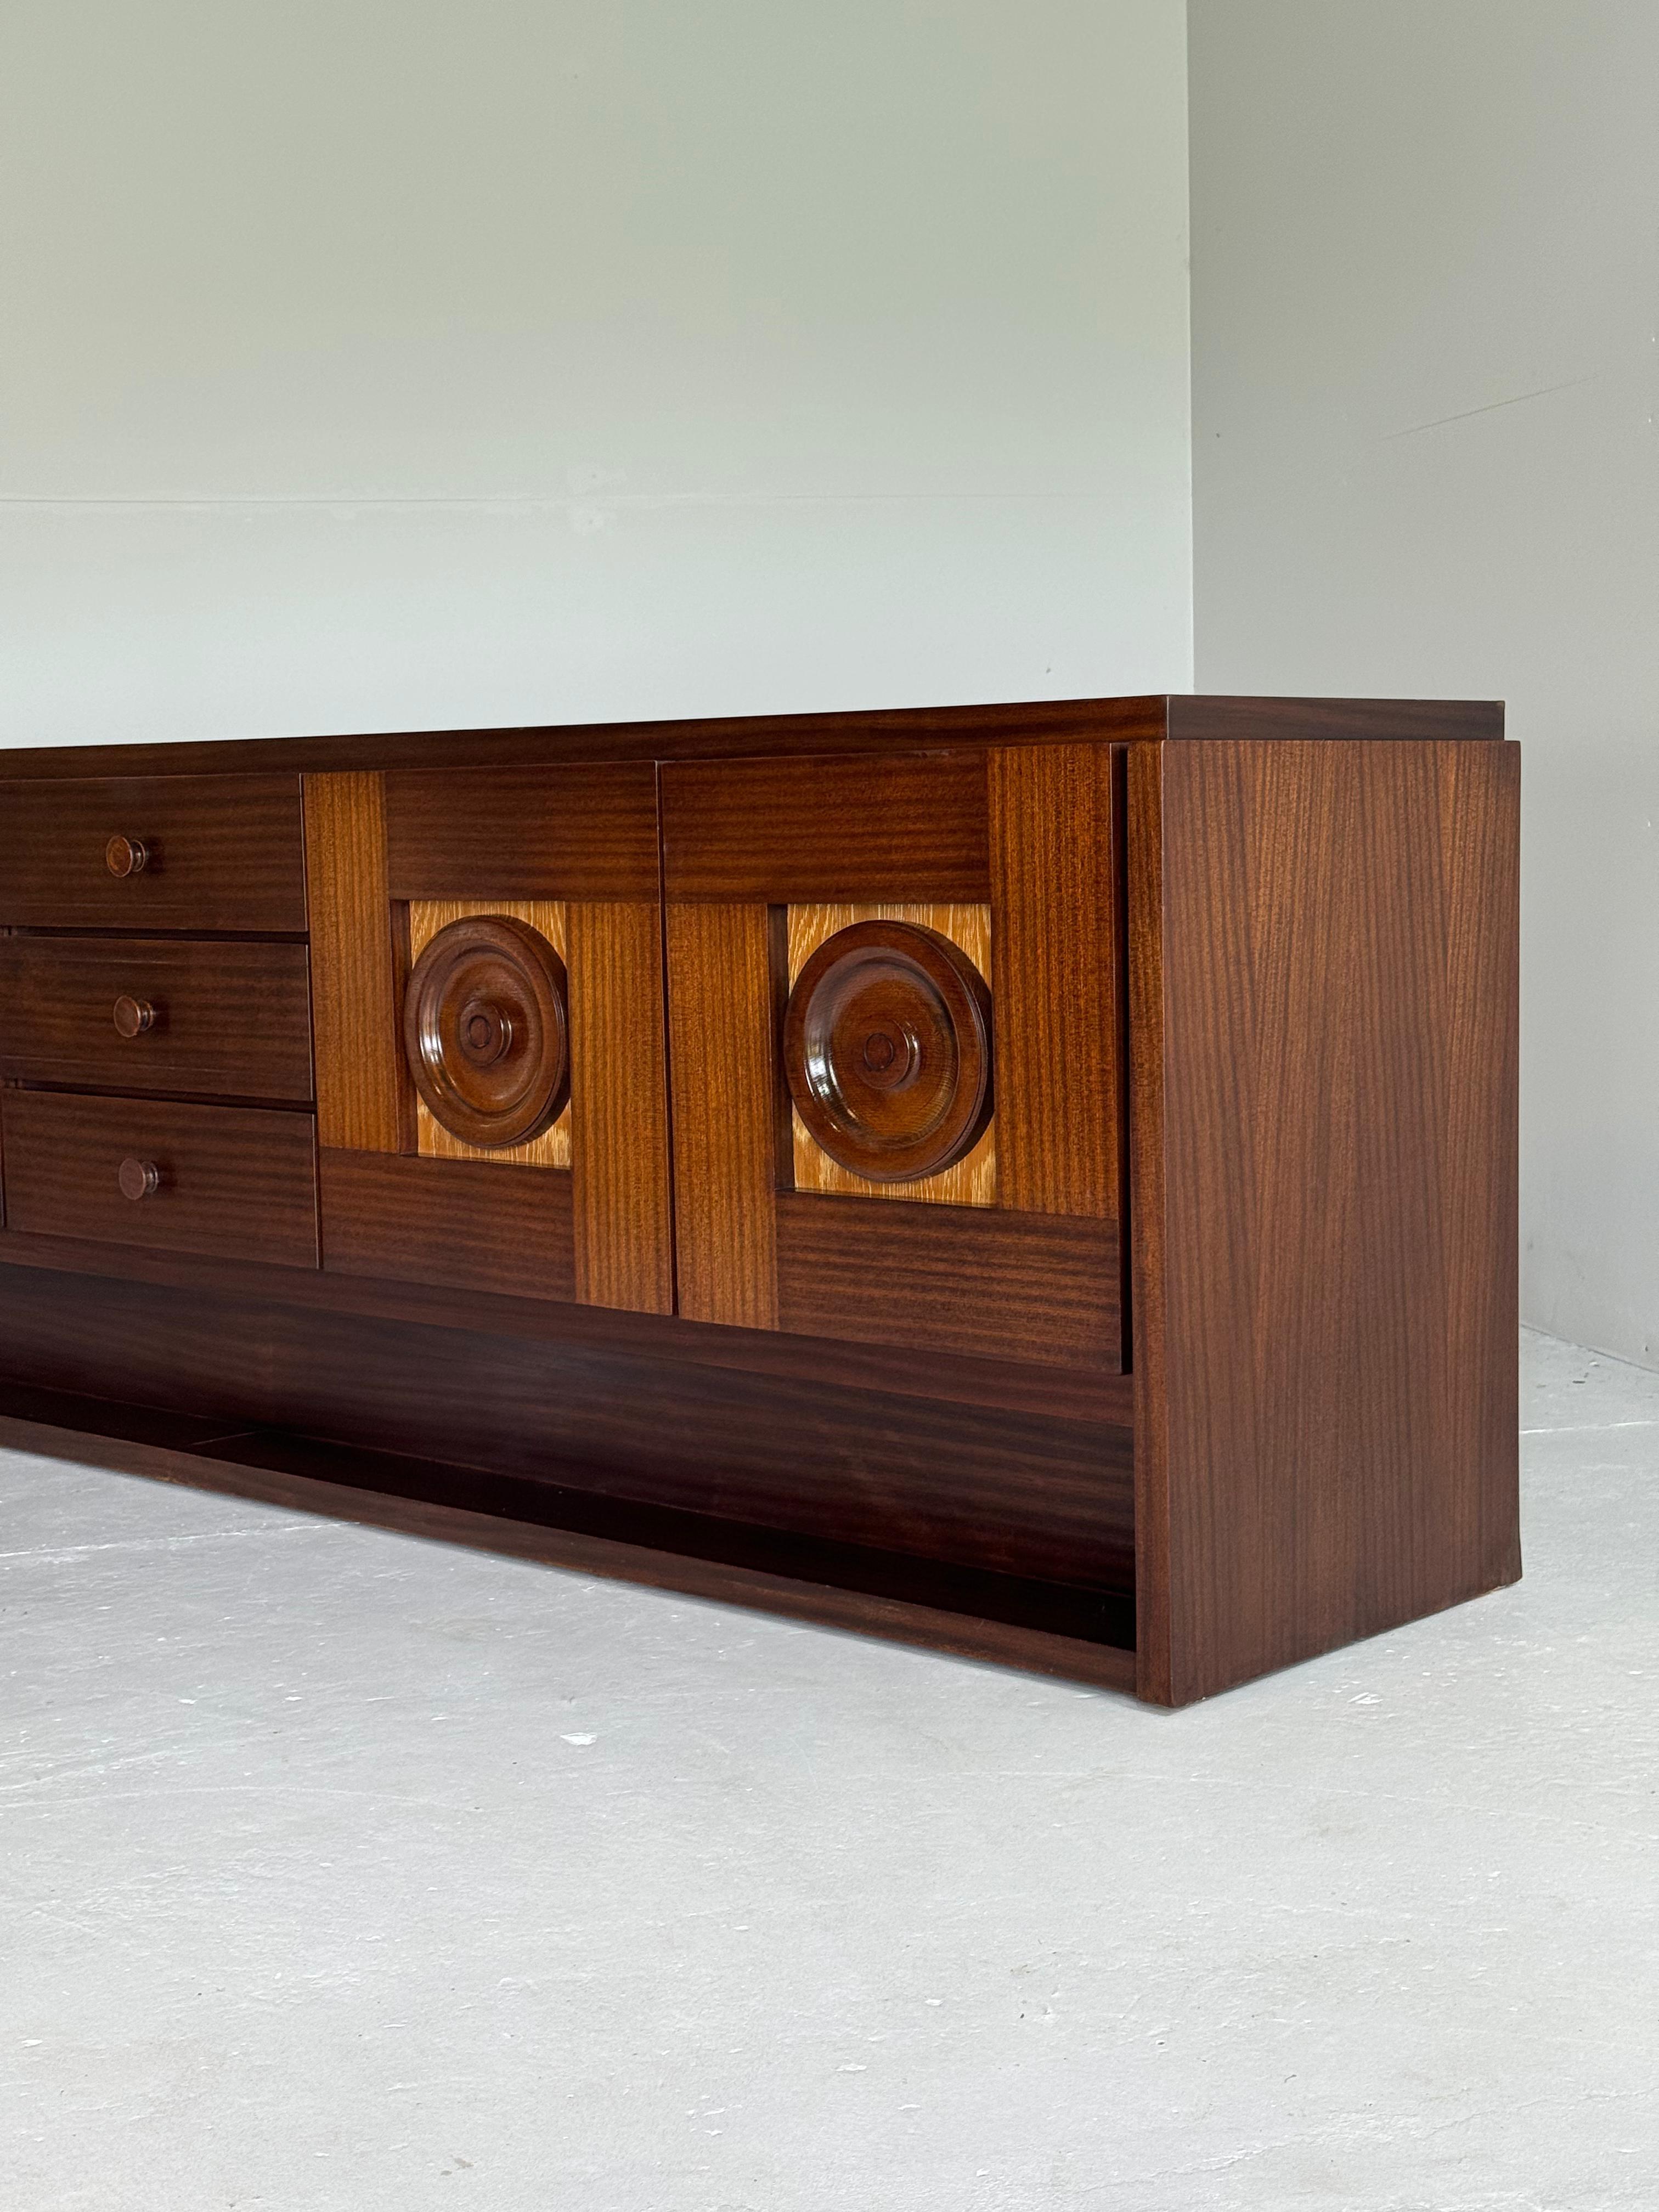 Very elegant and warm brown brutalist sideboard in oak.

Sideboard contains 4 opening doors with round graphical panel and 3 drawers centrated i the middle.

In absolute perfect and refinished condition.

Video on demand.

Matching Bar cabinet